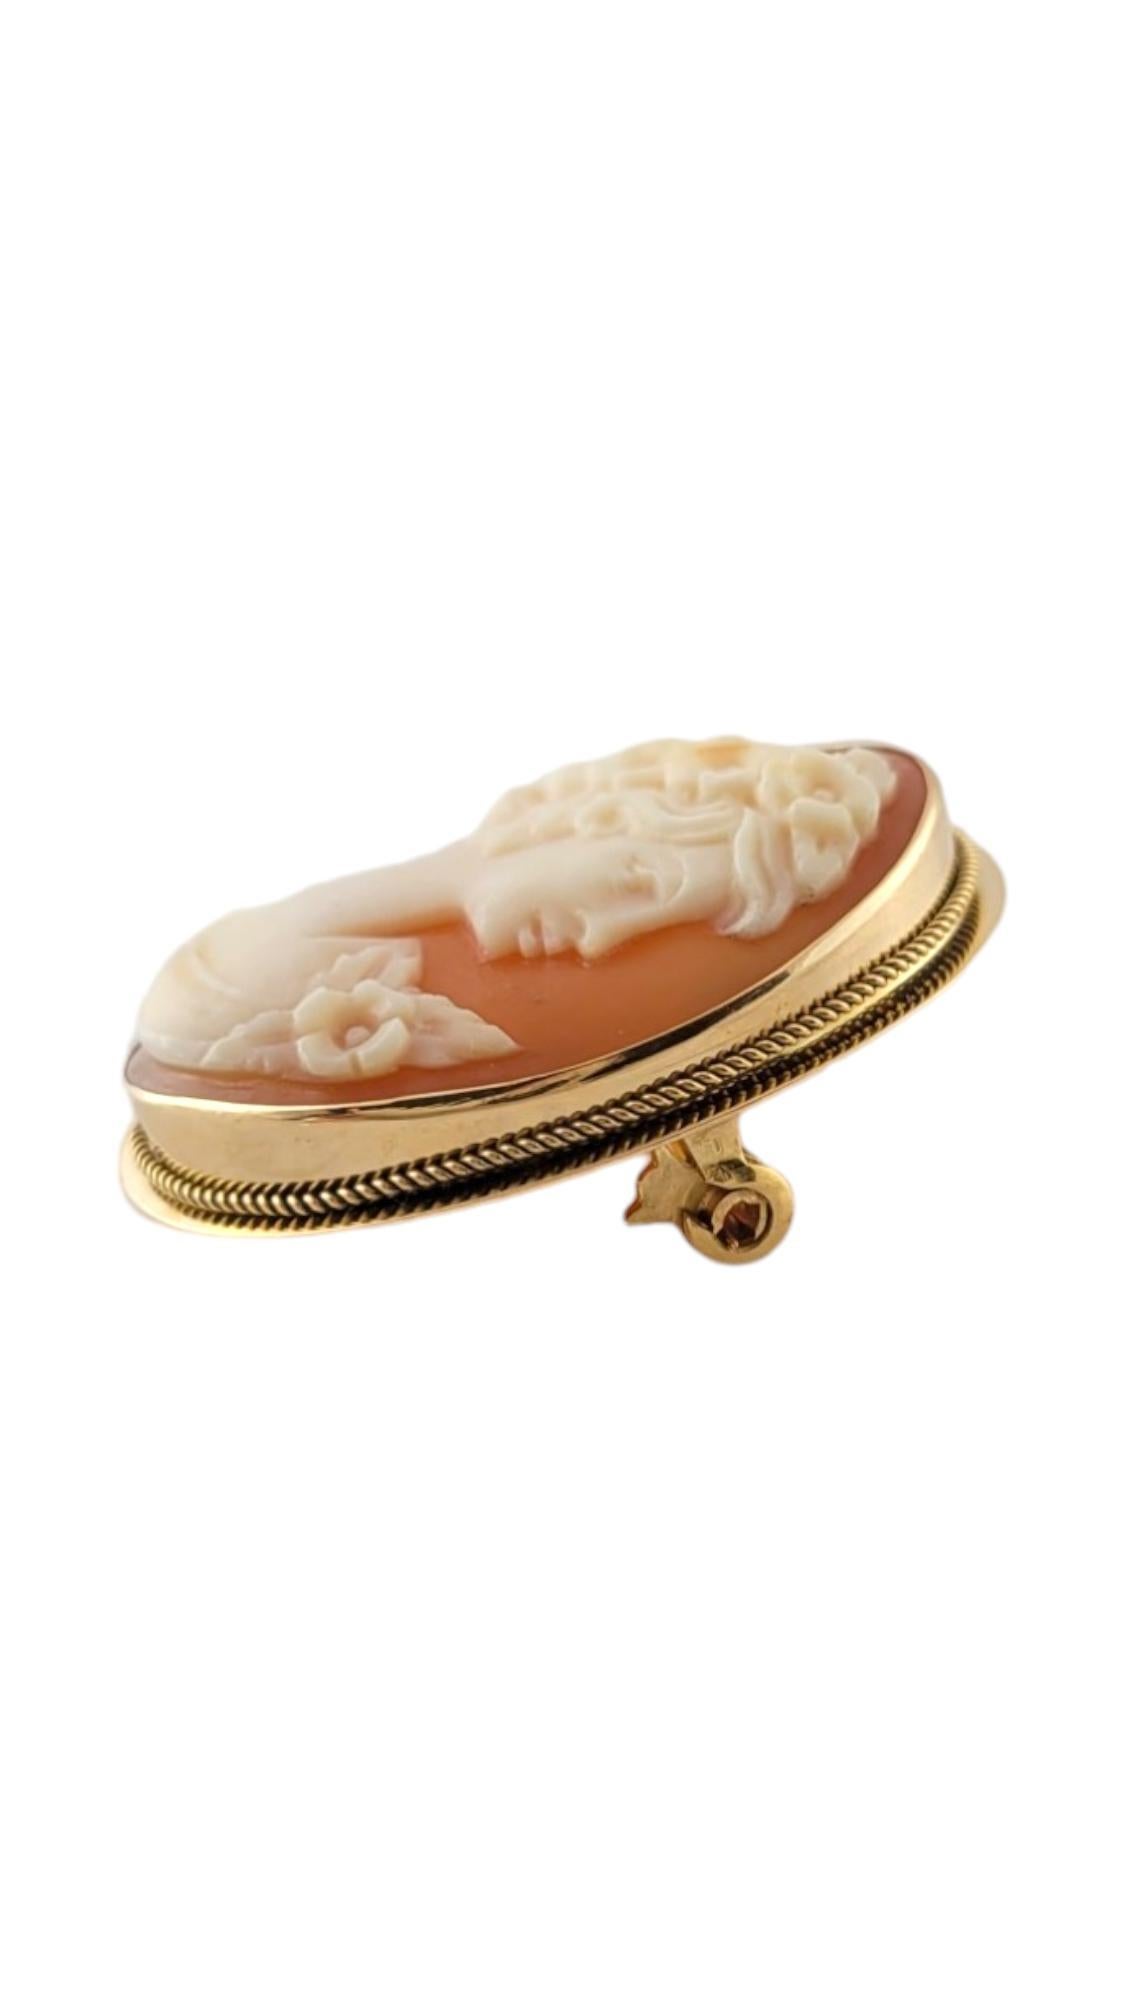 Vintage 18K Yellow Gold Cameo Pendant/Brooch

This gorgeous cameo brooch can double as a pendant and is crafted from 18K yellow gold!

Size: 26.97mm X 21.32mm X 5.72mm
Length w/ bail: 32.52mm

Weight: 2.49 dwt/ 3.88 g

Hallmark: 750

Very good